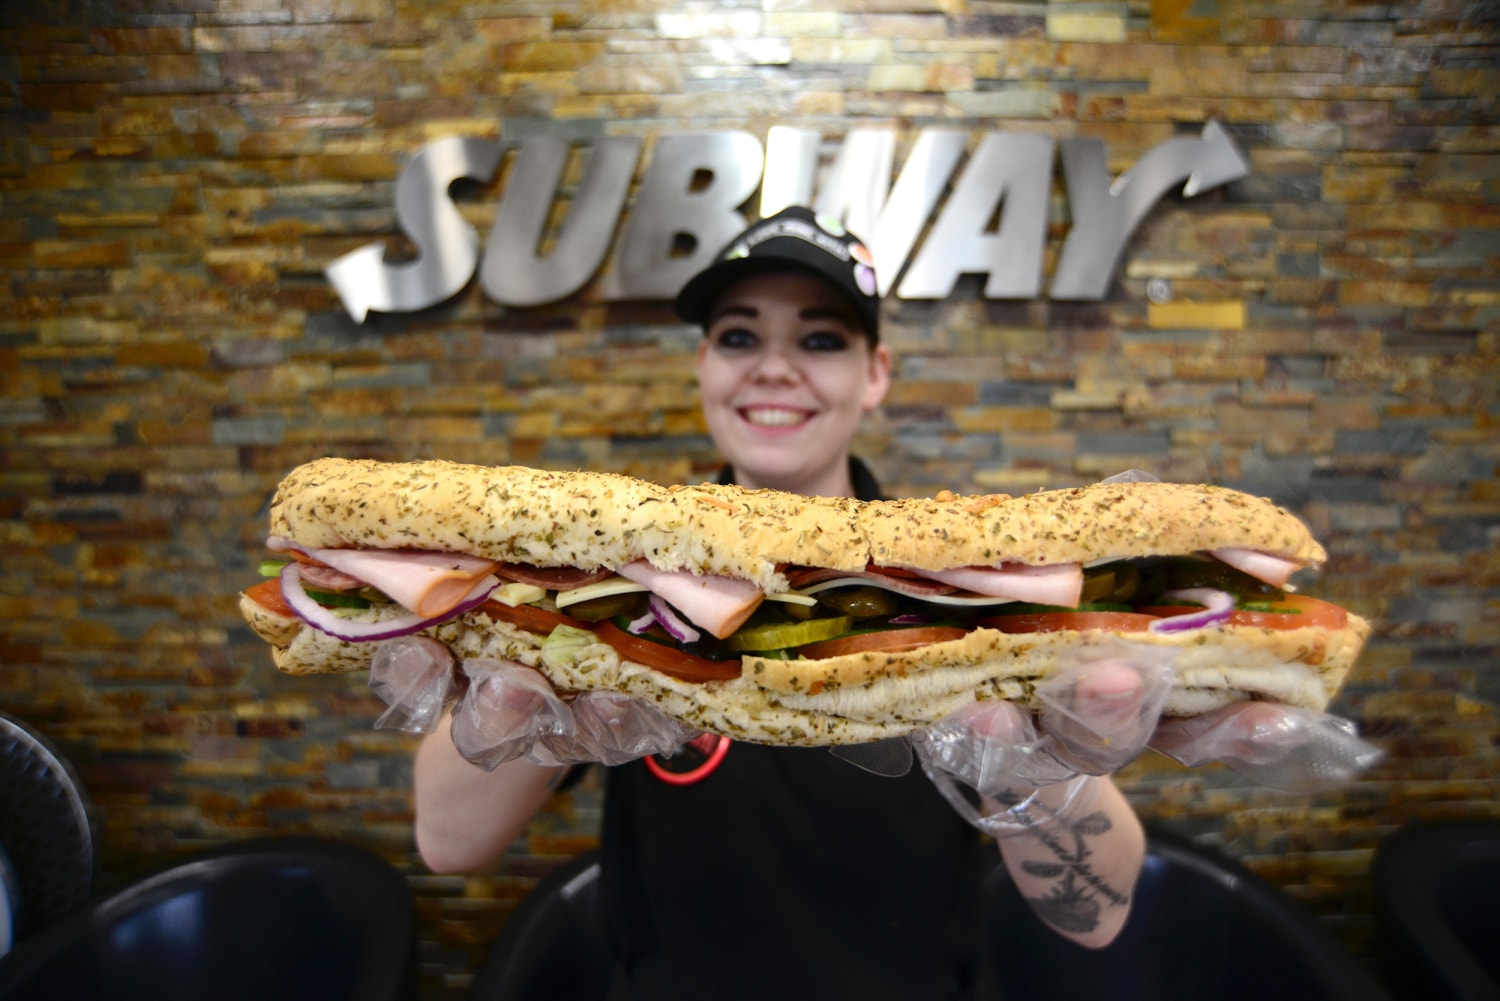 Subway Offering Free Subs For Life In Exchange For A Big Sandwich Tattoo